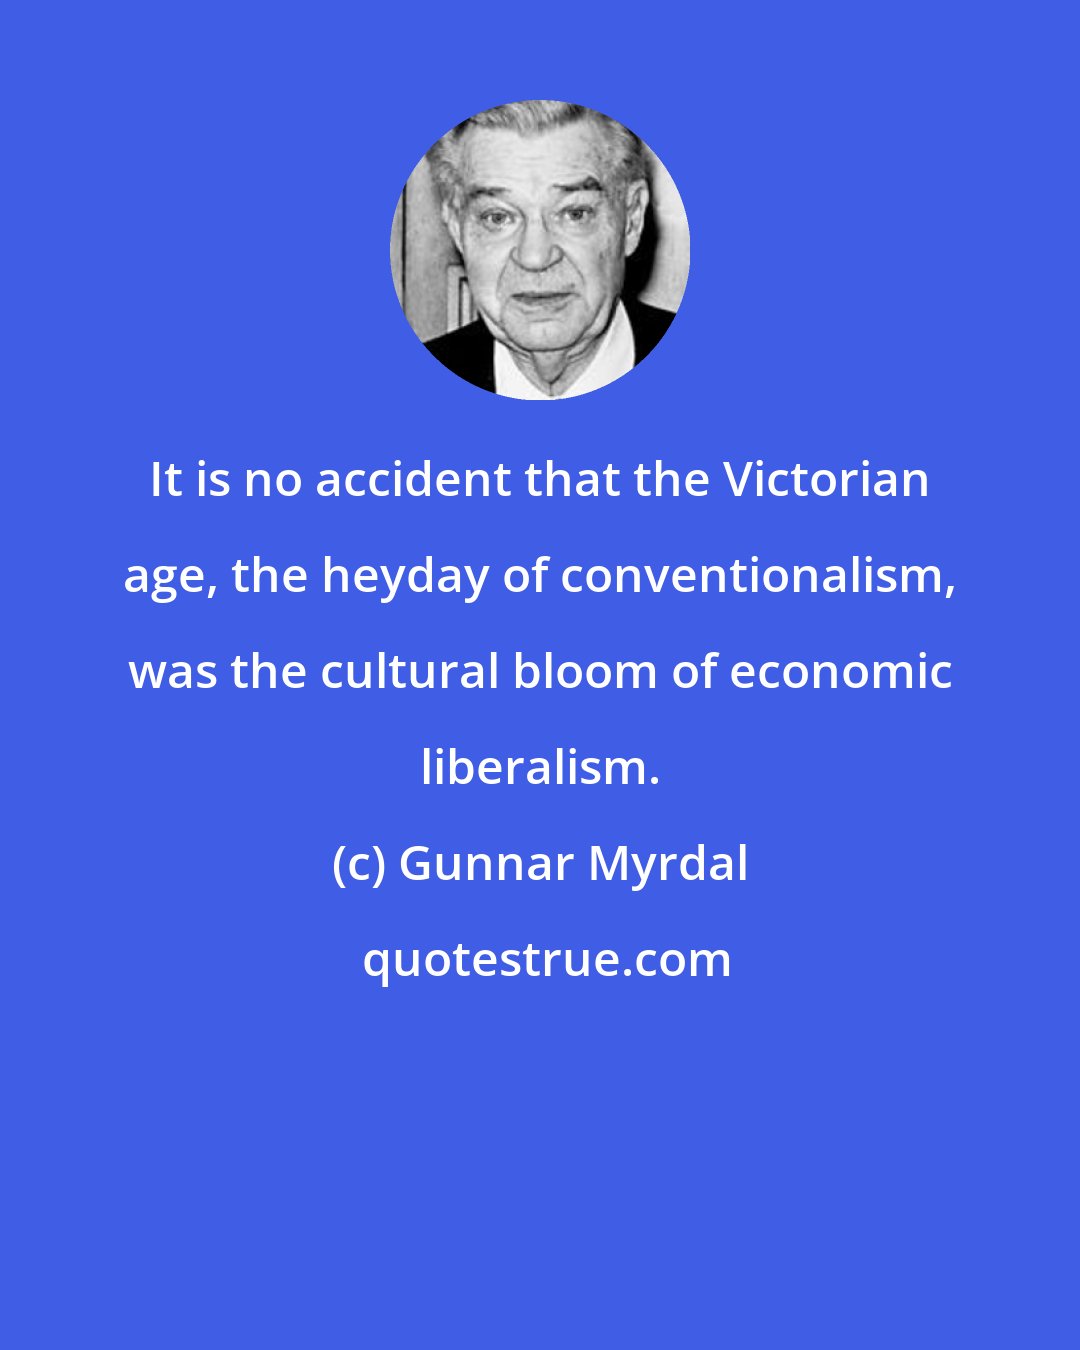 Gunnar Myrdal: It is no accident that the Victorian age, the heyday of conventionalism, was the cultural bloom of economic liberalism.